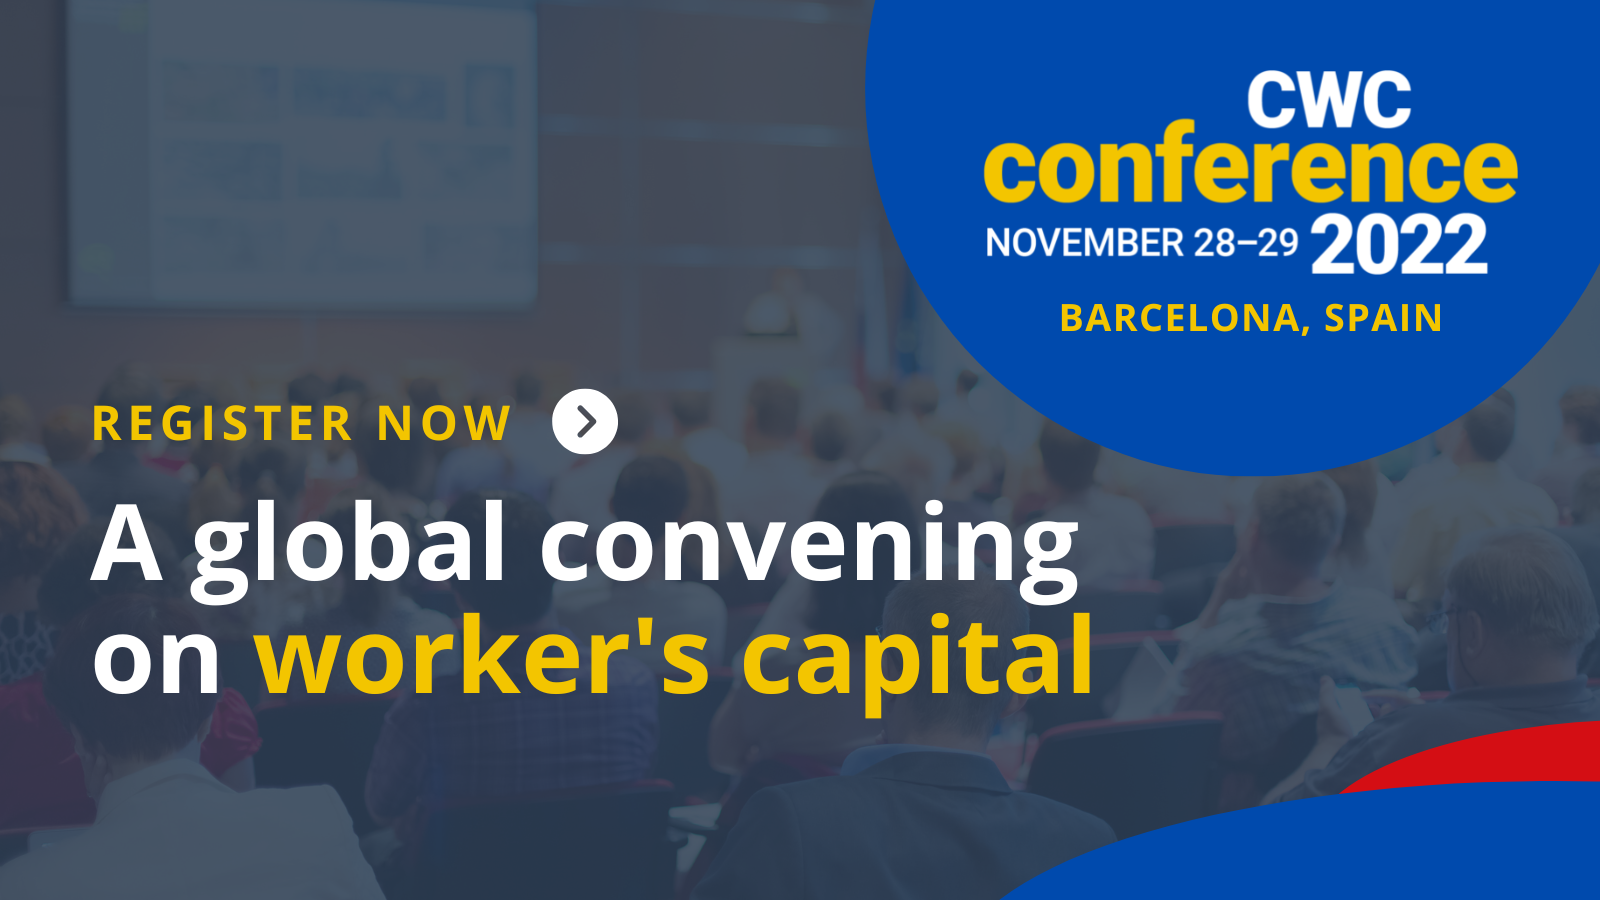 Agenda: 2022 Workers' Capital Conference